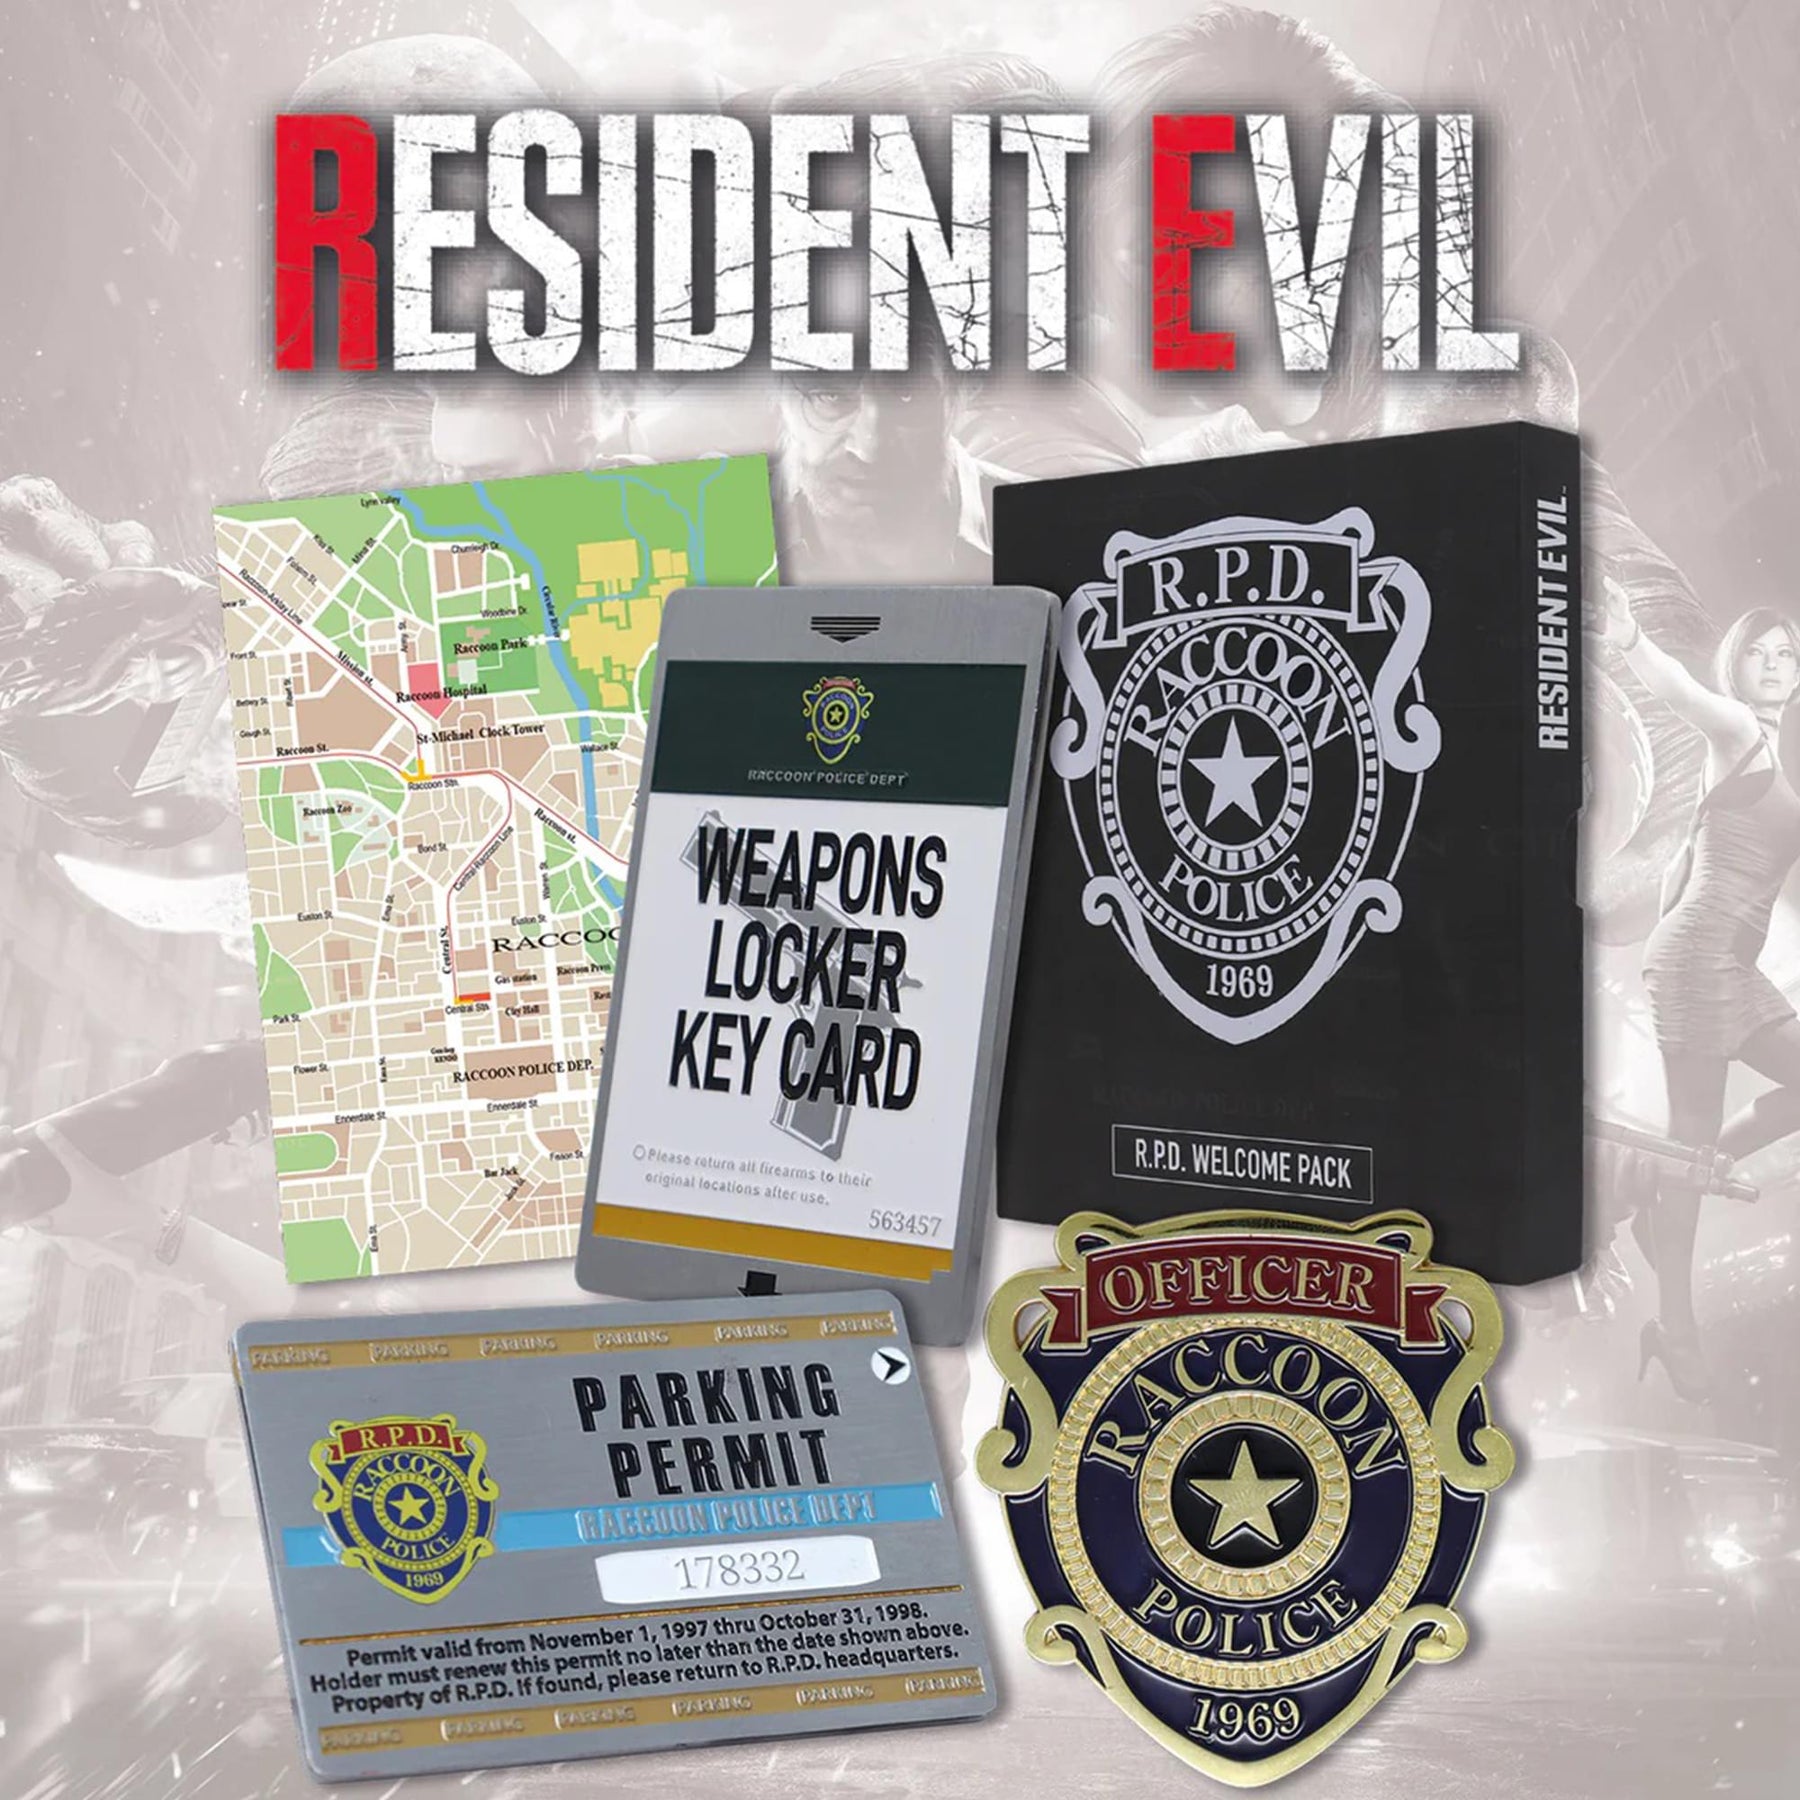 Resident Evil 2 Limited Edition R.P.D Welcome Pack